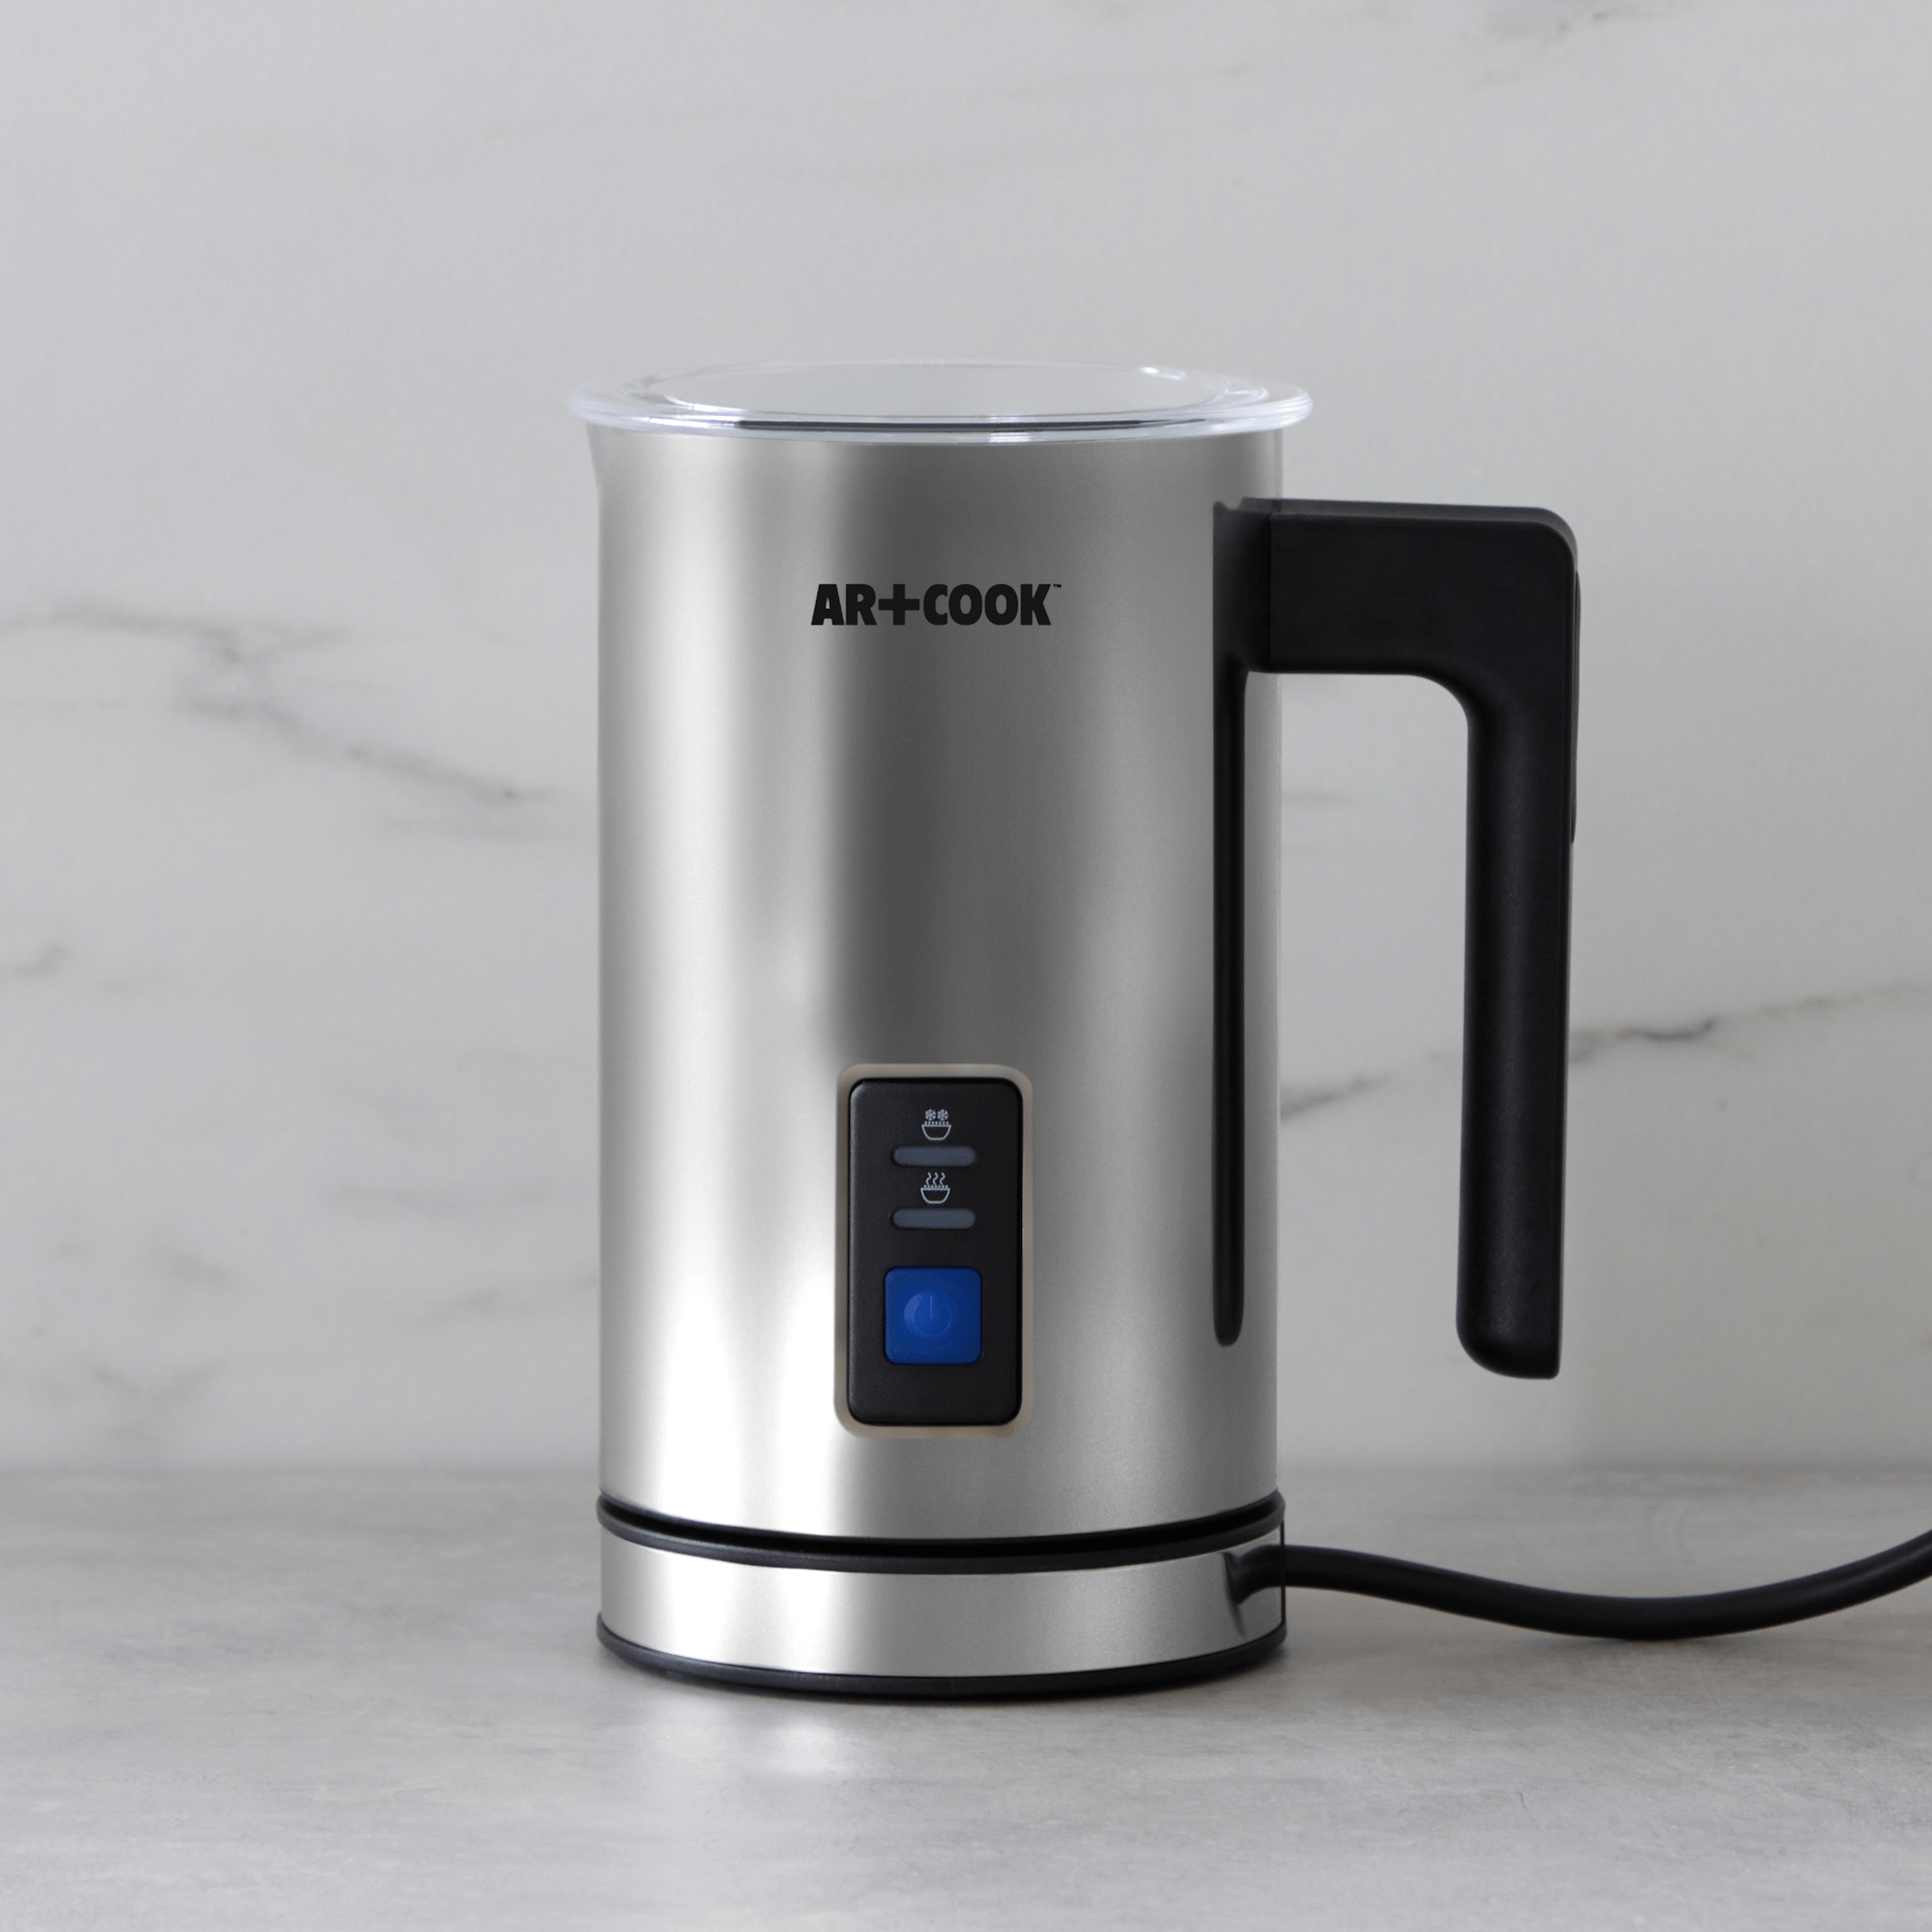 This Now-$10 Milk Frother Creates a 'Nice, Glossy Foam' on Coffee